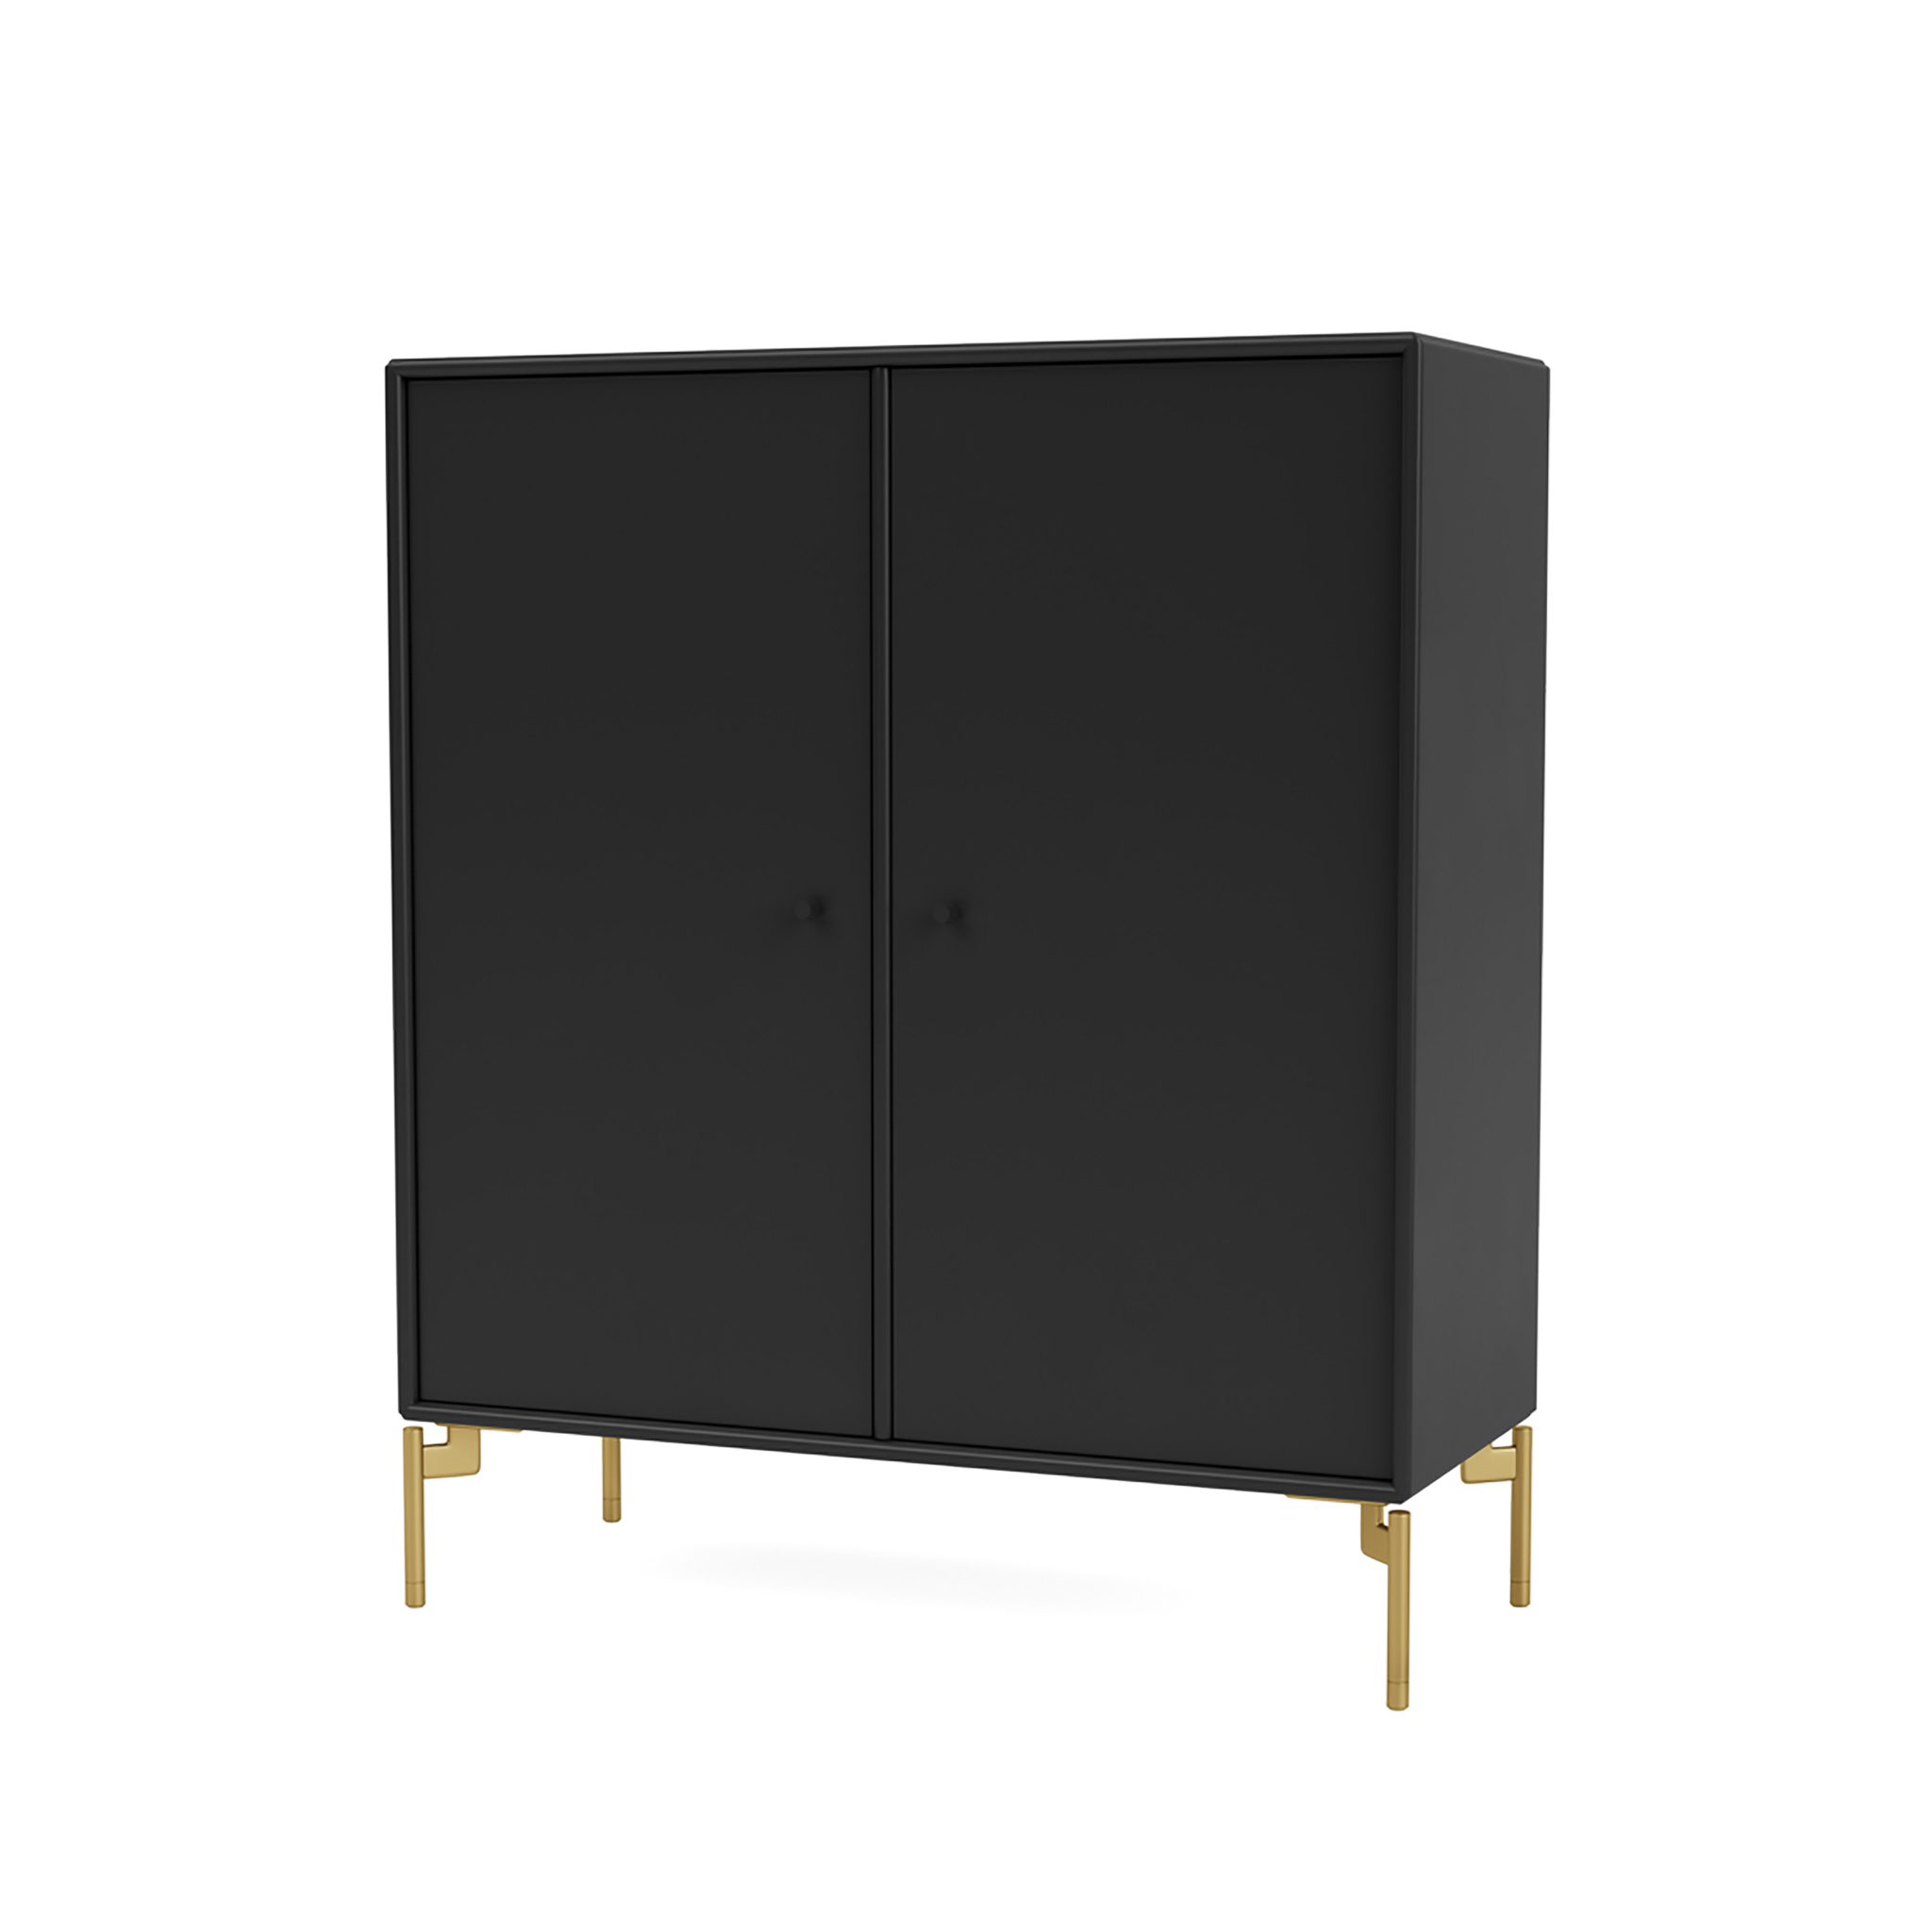 MONTANA // COVER - SCHRANK | 05 BLACK | BEINFARBE MESSING